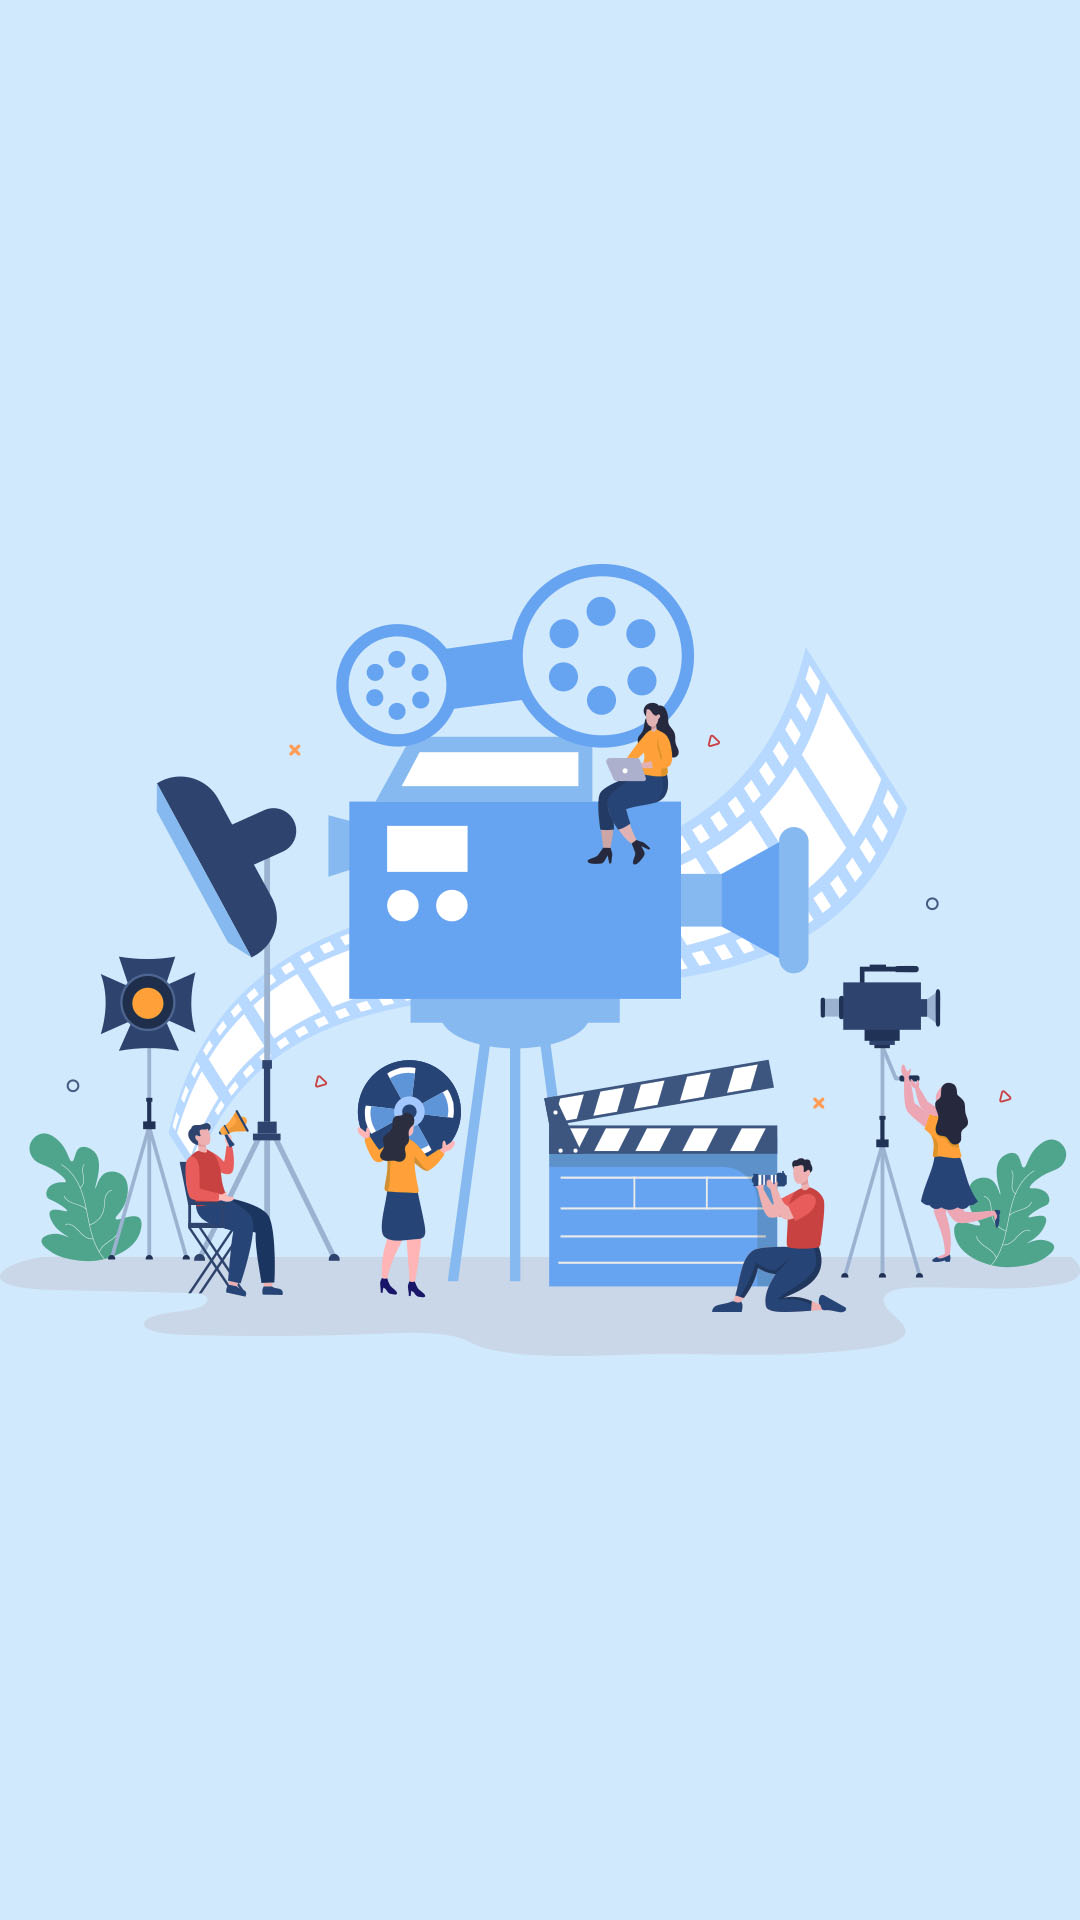 Film Industry Search engine